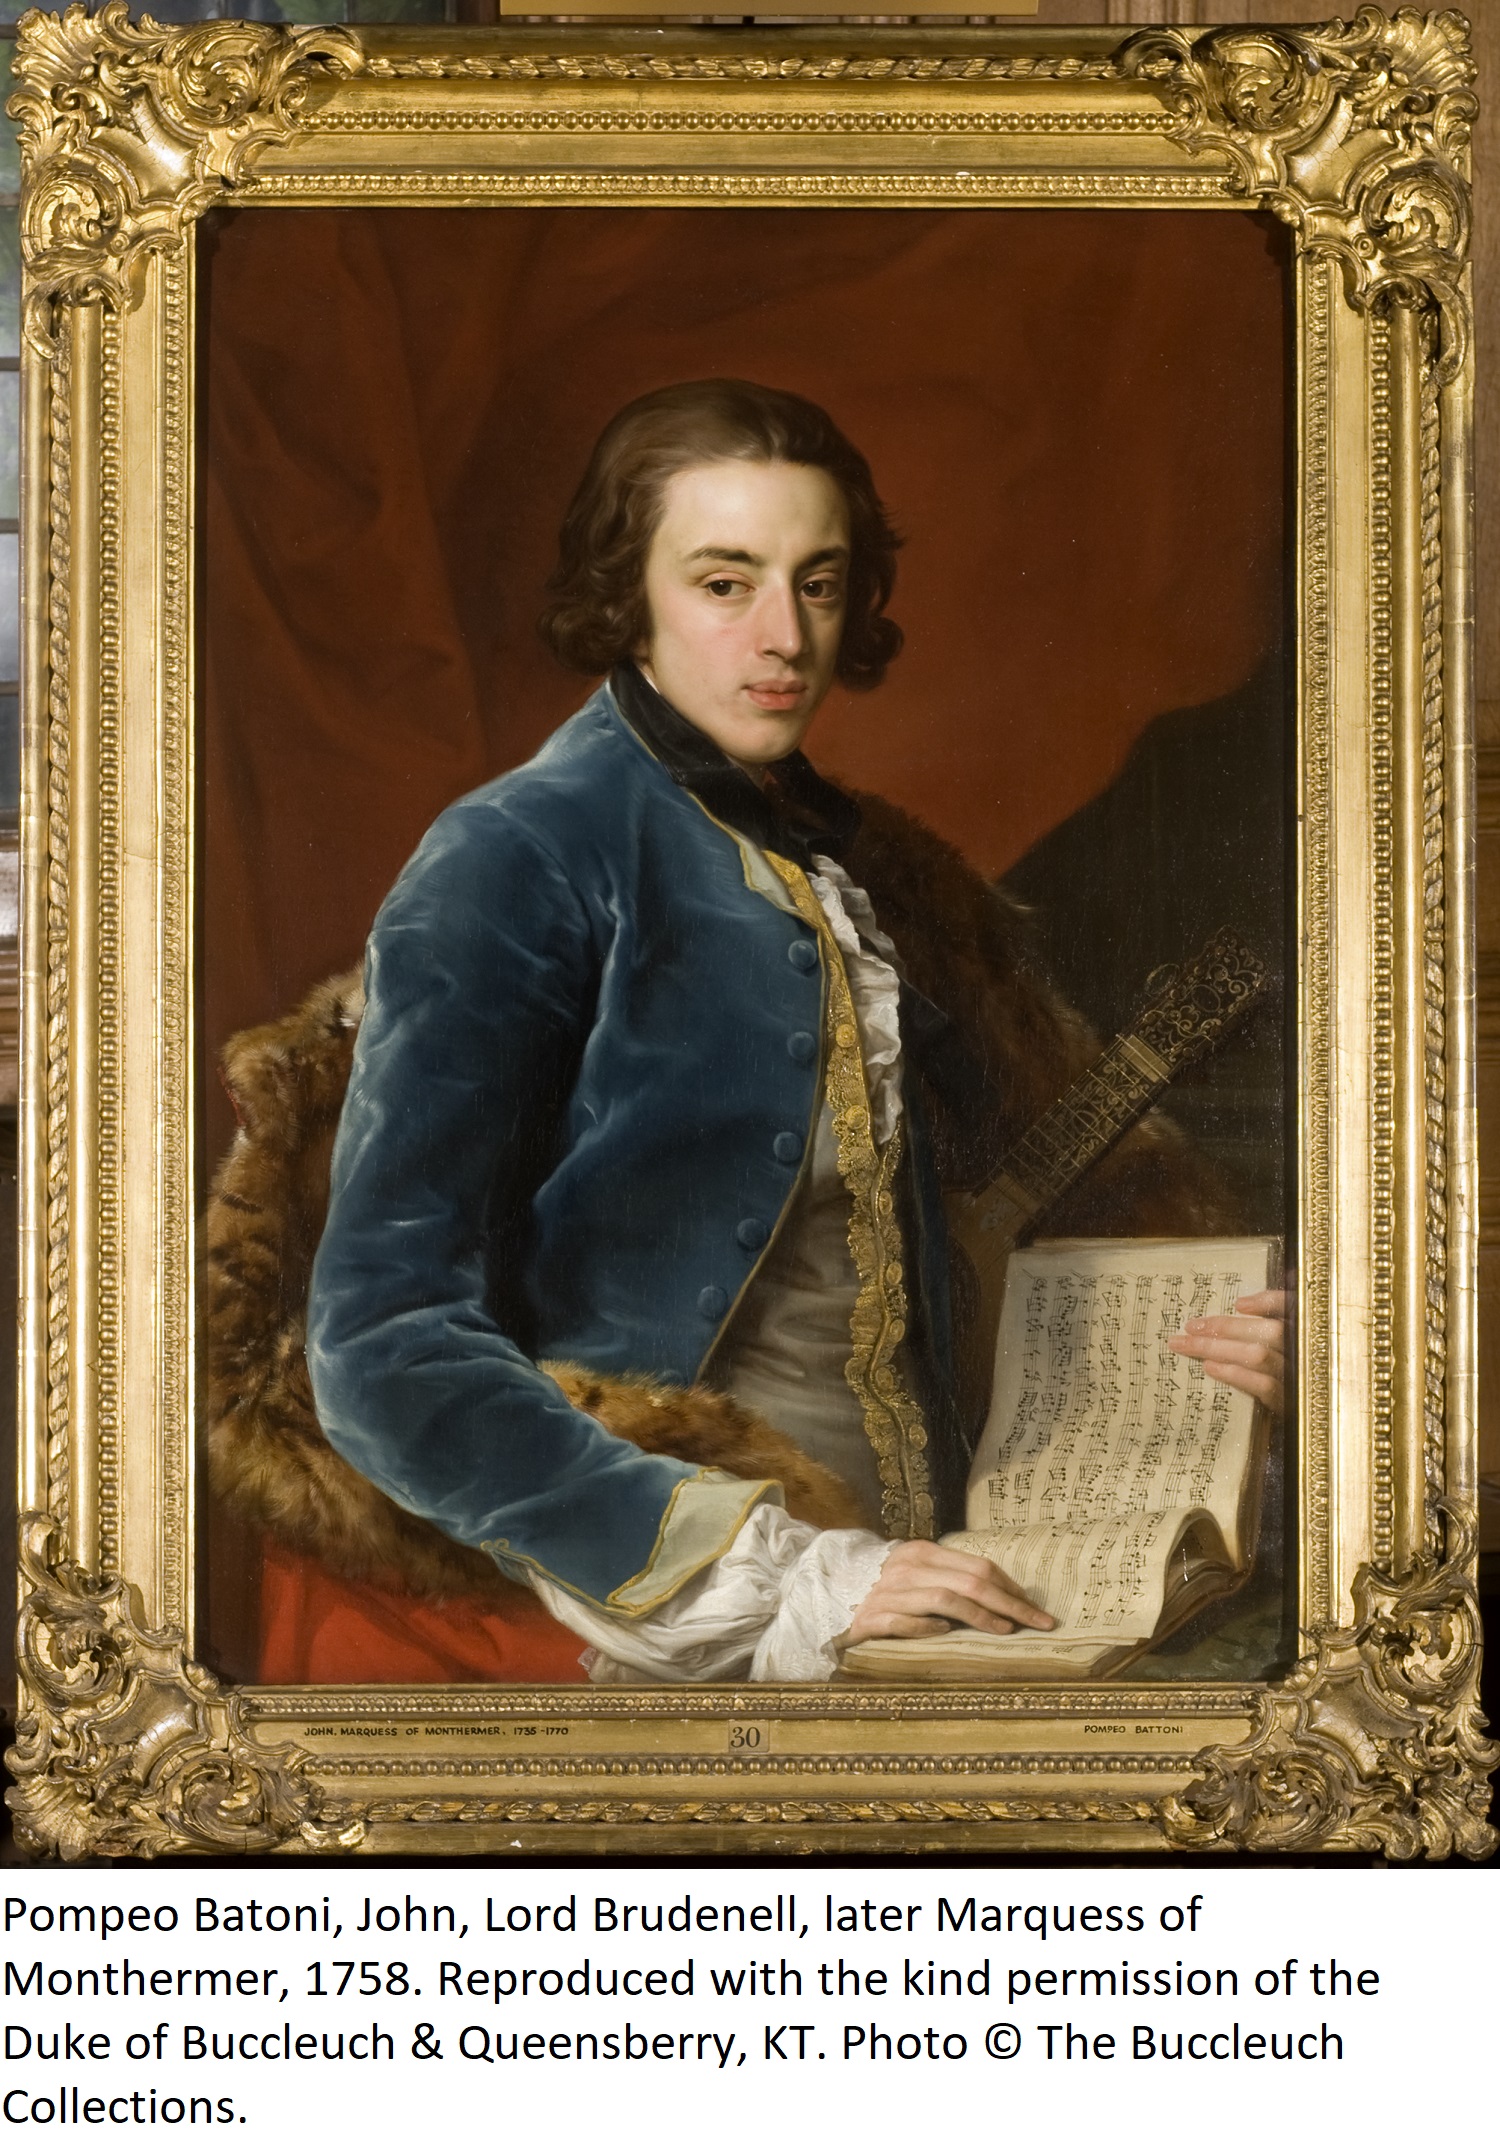 Pompeo Batoni, John, Lord Brudenell, later Marquess of Monthermer, 1758. Reproduced with the kind permission of the Duke of Buccleuch & Queensberry, KT. Photo © The Buccleuch Collections.